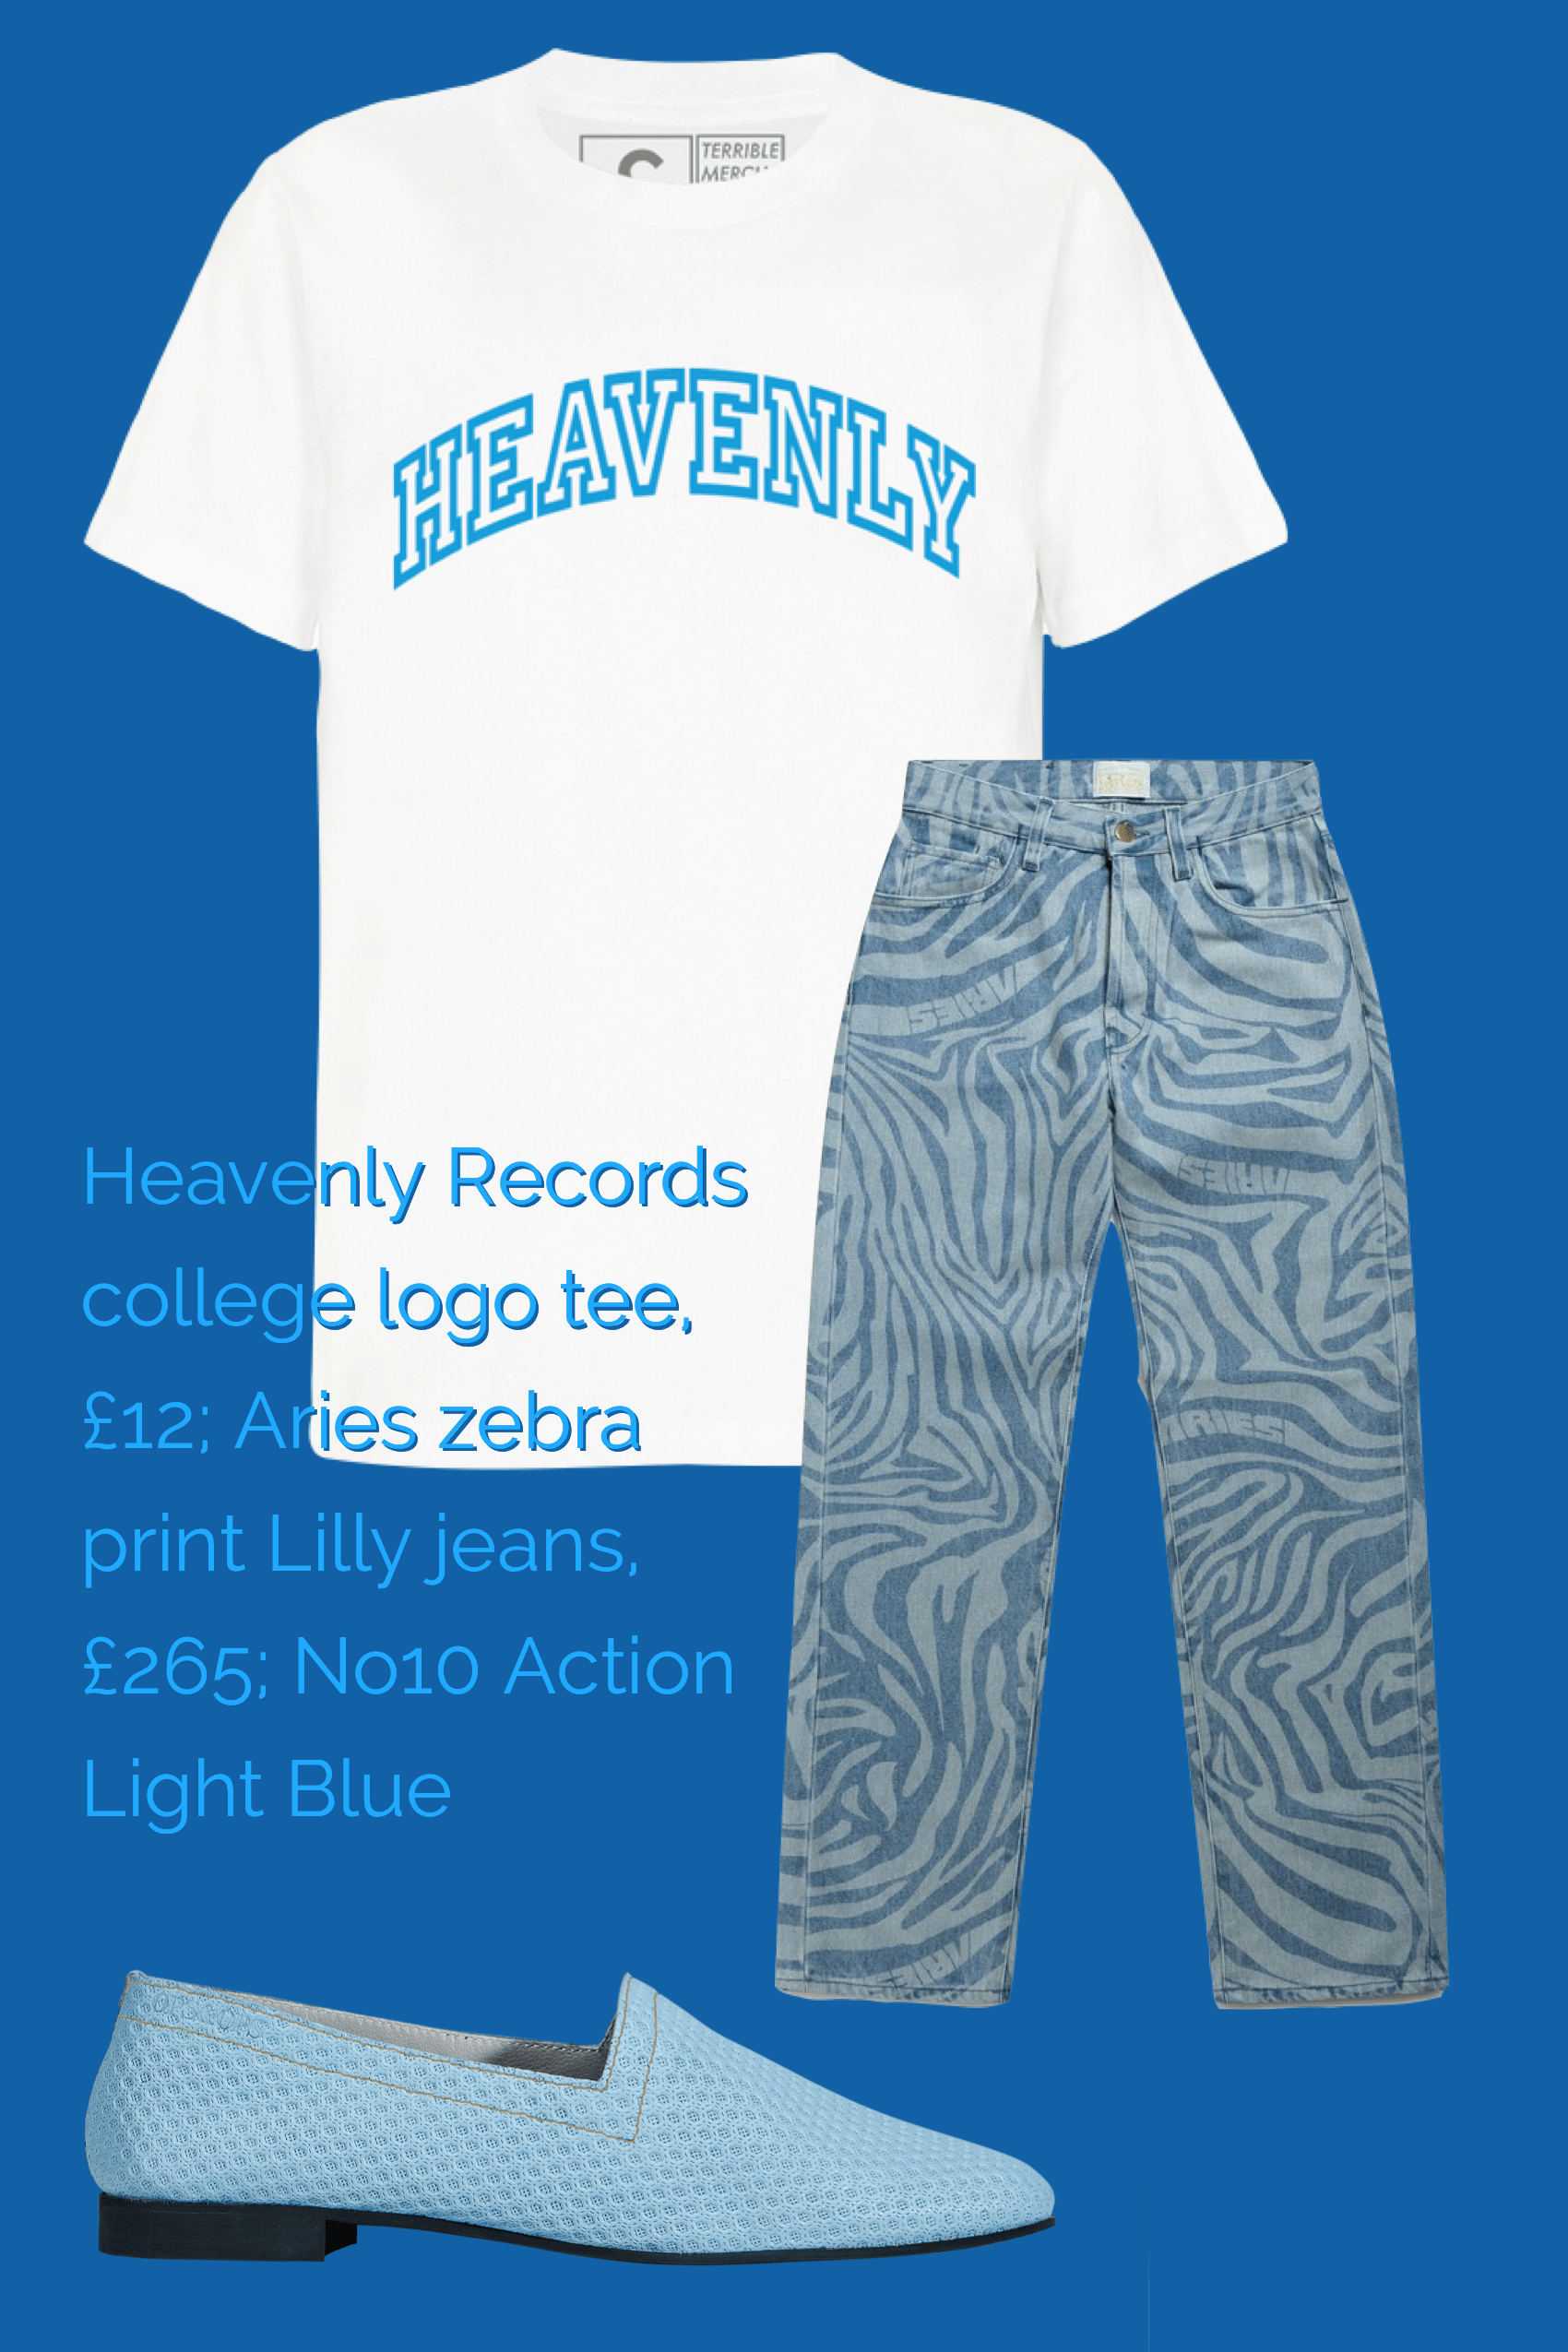 Ops&Ops No10 Action Light Blue flats teamed with Aries zebra-print jeans and Heavenly Records t-shirt